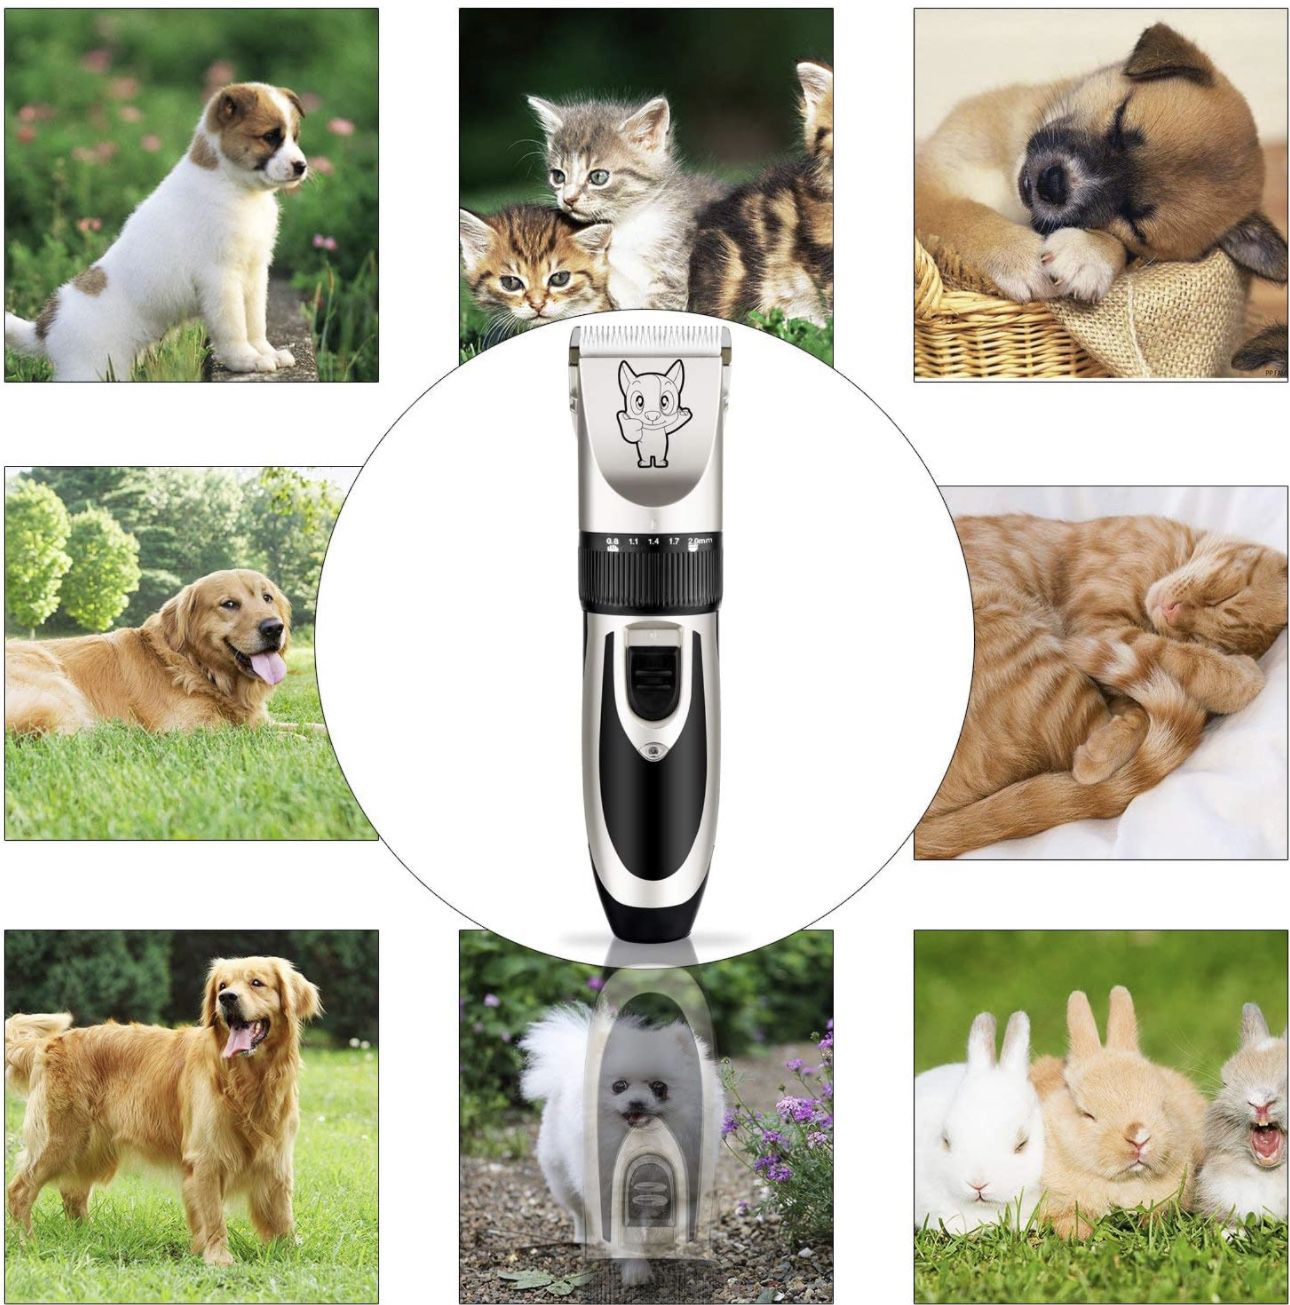 Dog Grooming Kit Clippers, Low Noise, Electric Quiet, Rechargeable, Cordless, Pet Hair Thick Coats Clippers Trimmers Set, Suitable for Dogs, Cats, and